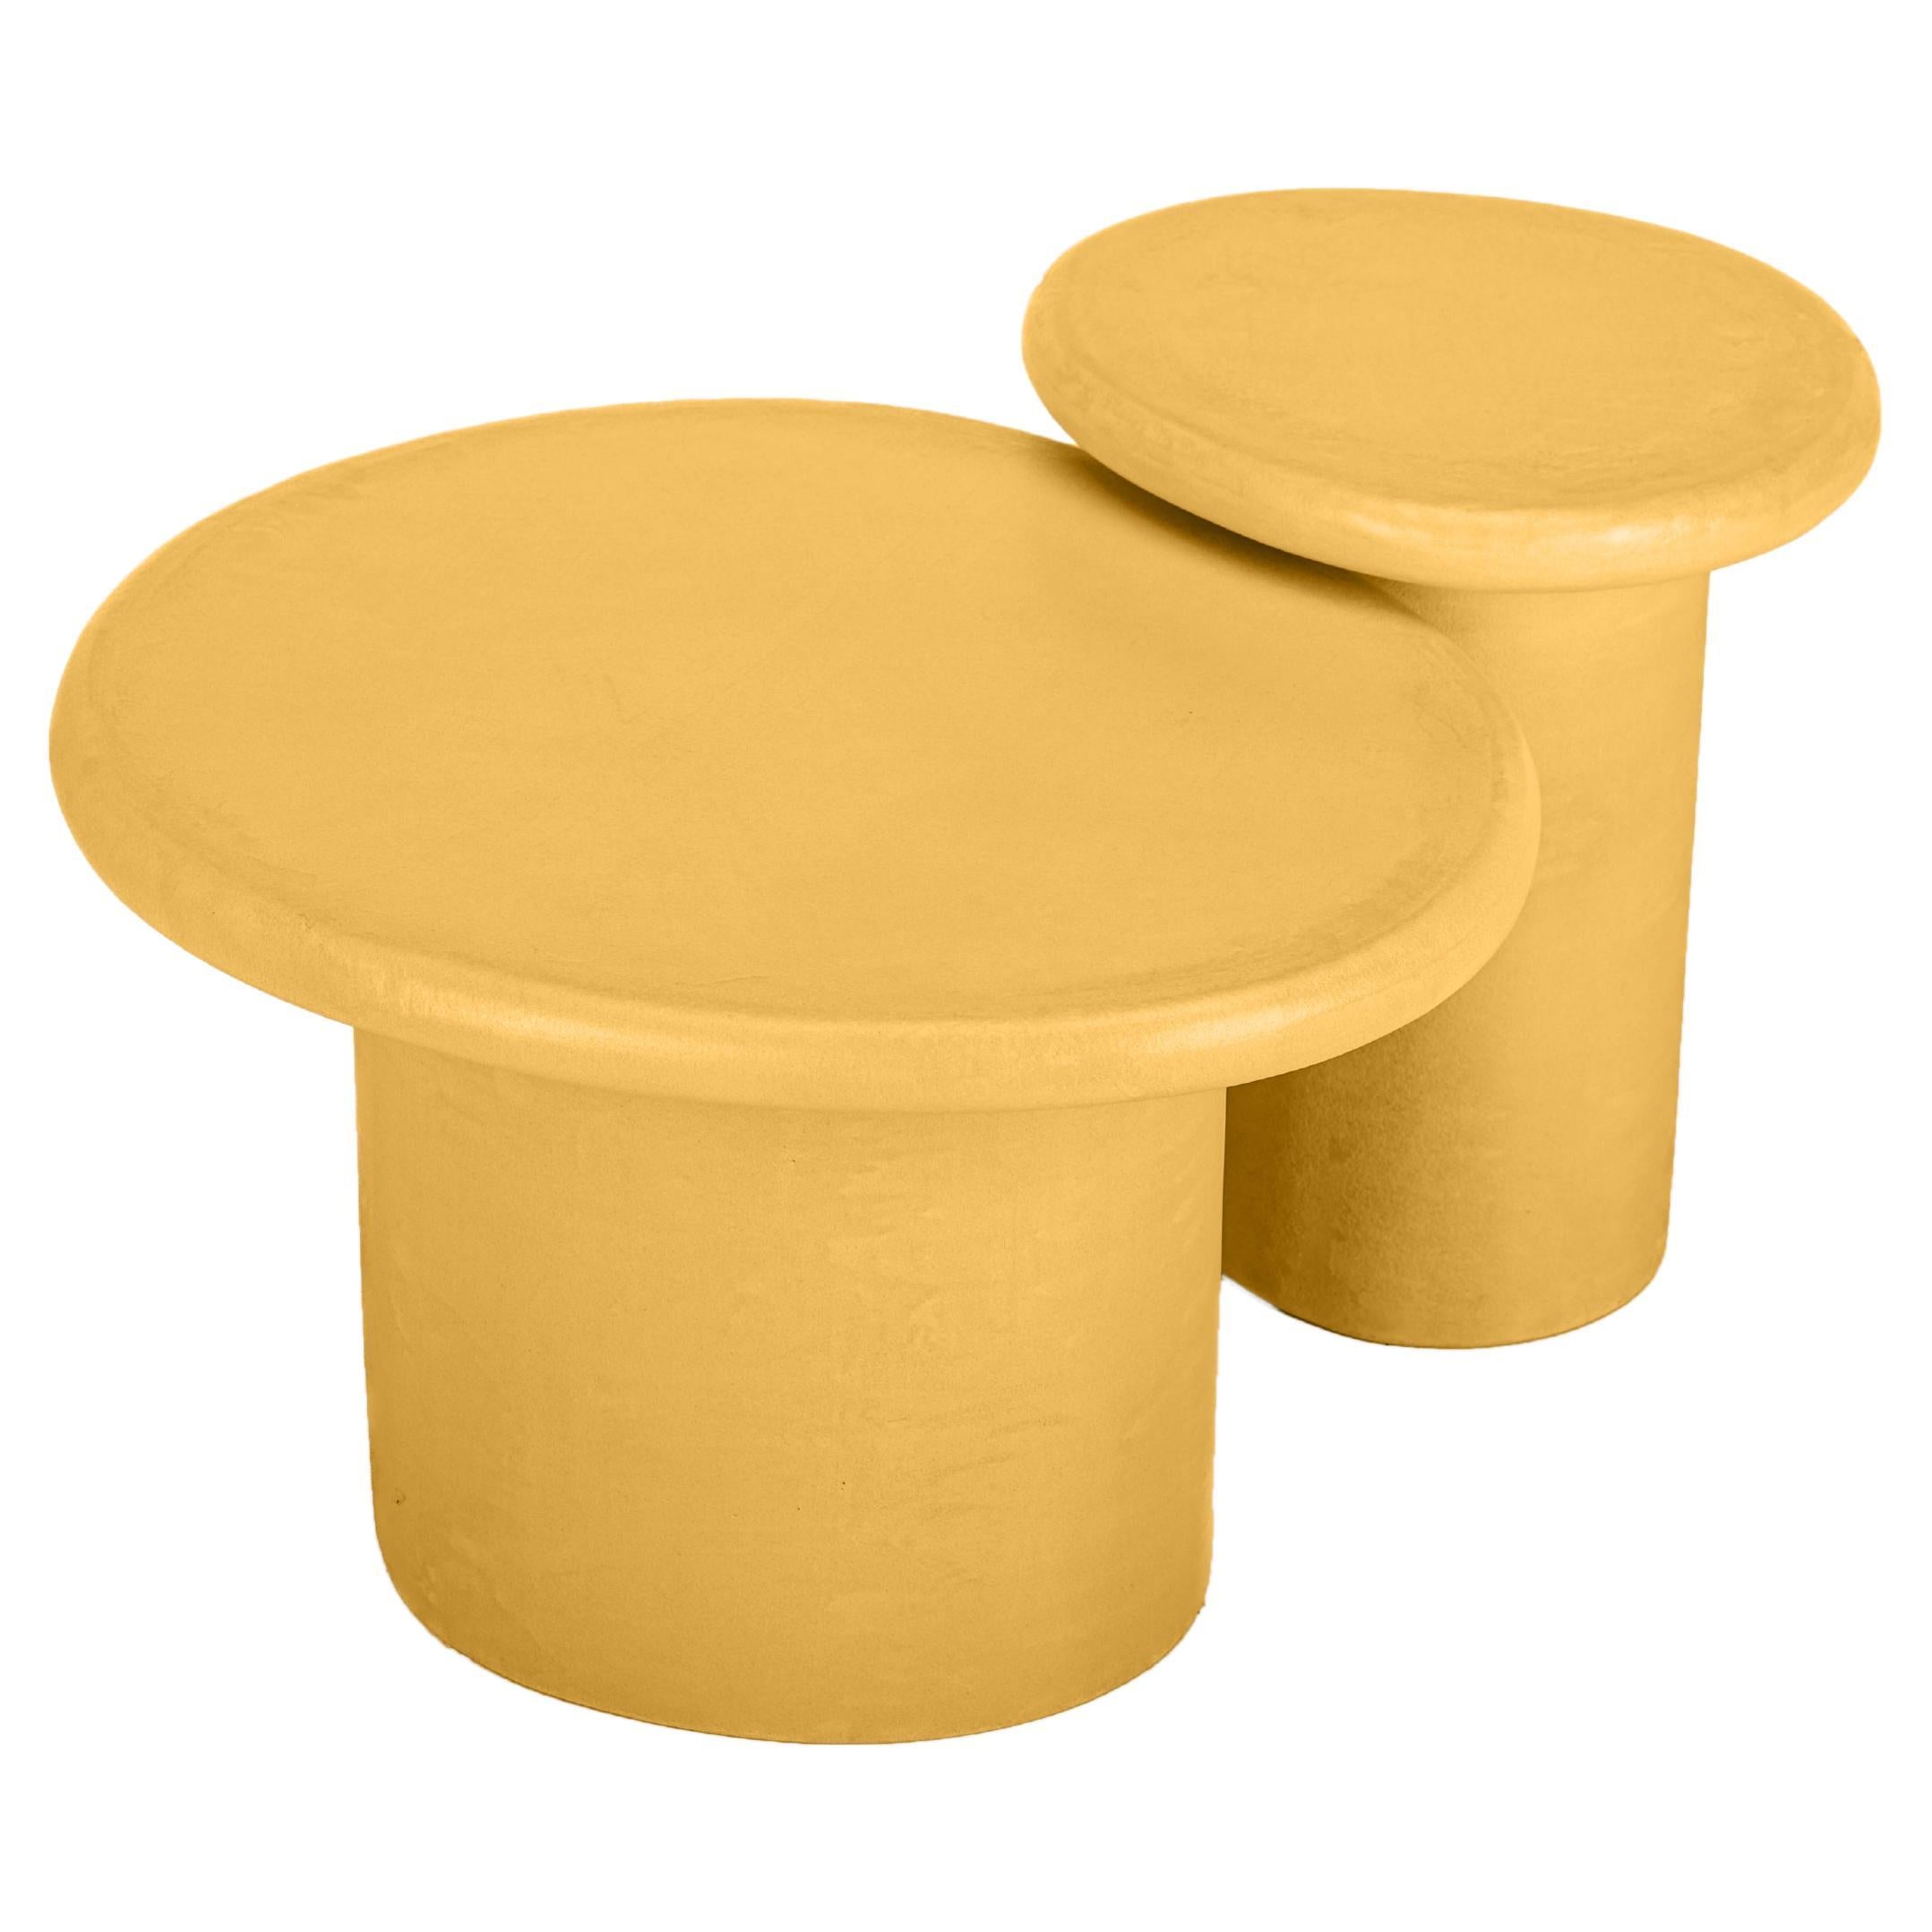 Organic Shaped Mortex Coffee Table Set "Sami" BM09 by Isabelle Beaumont